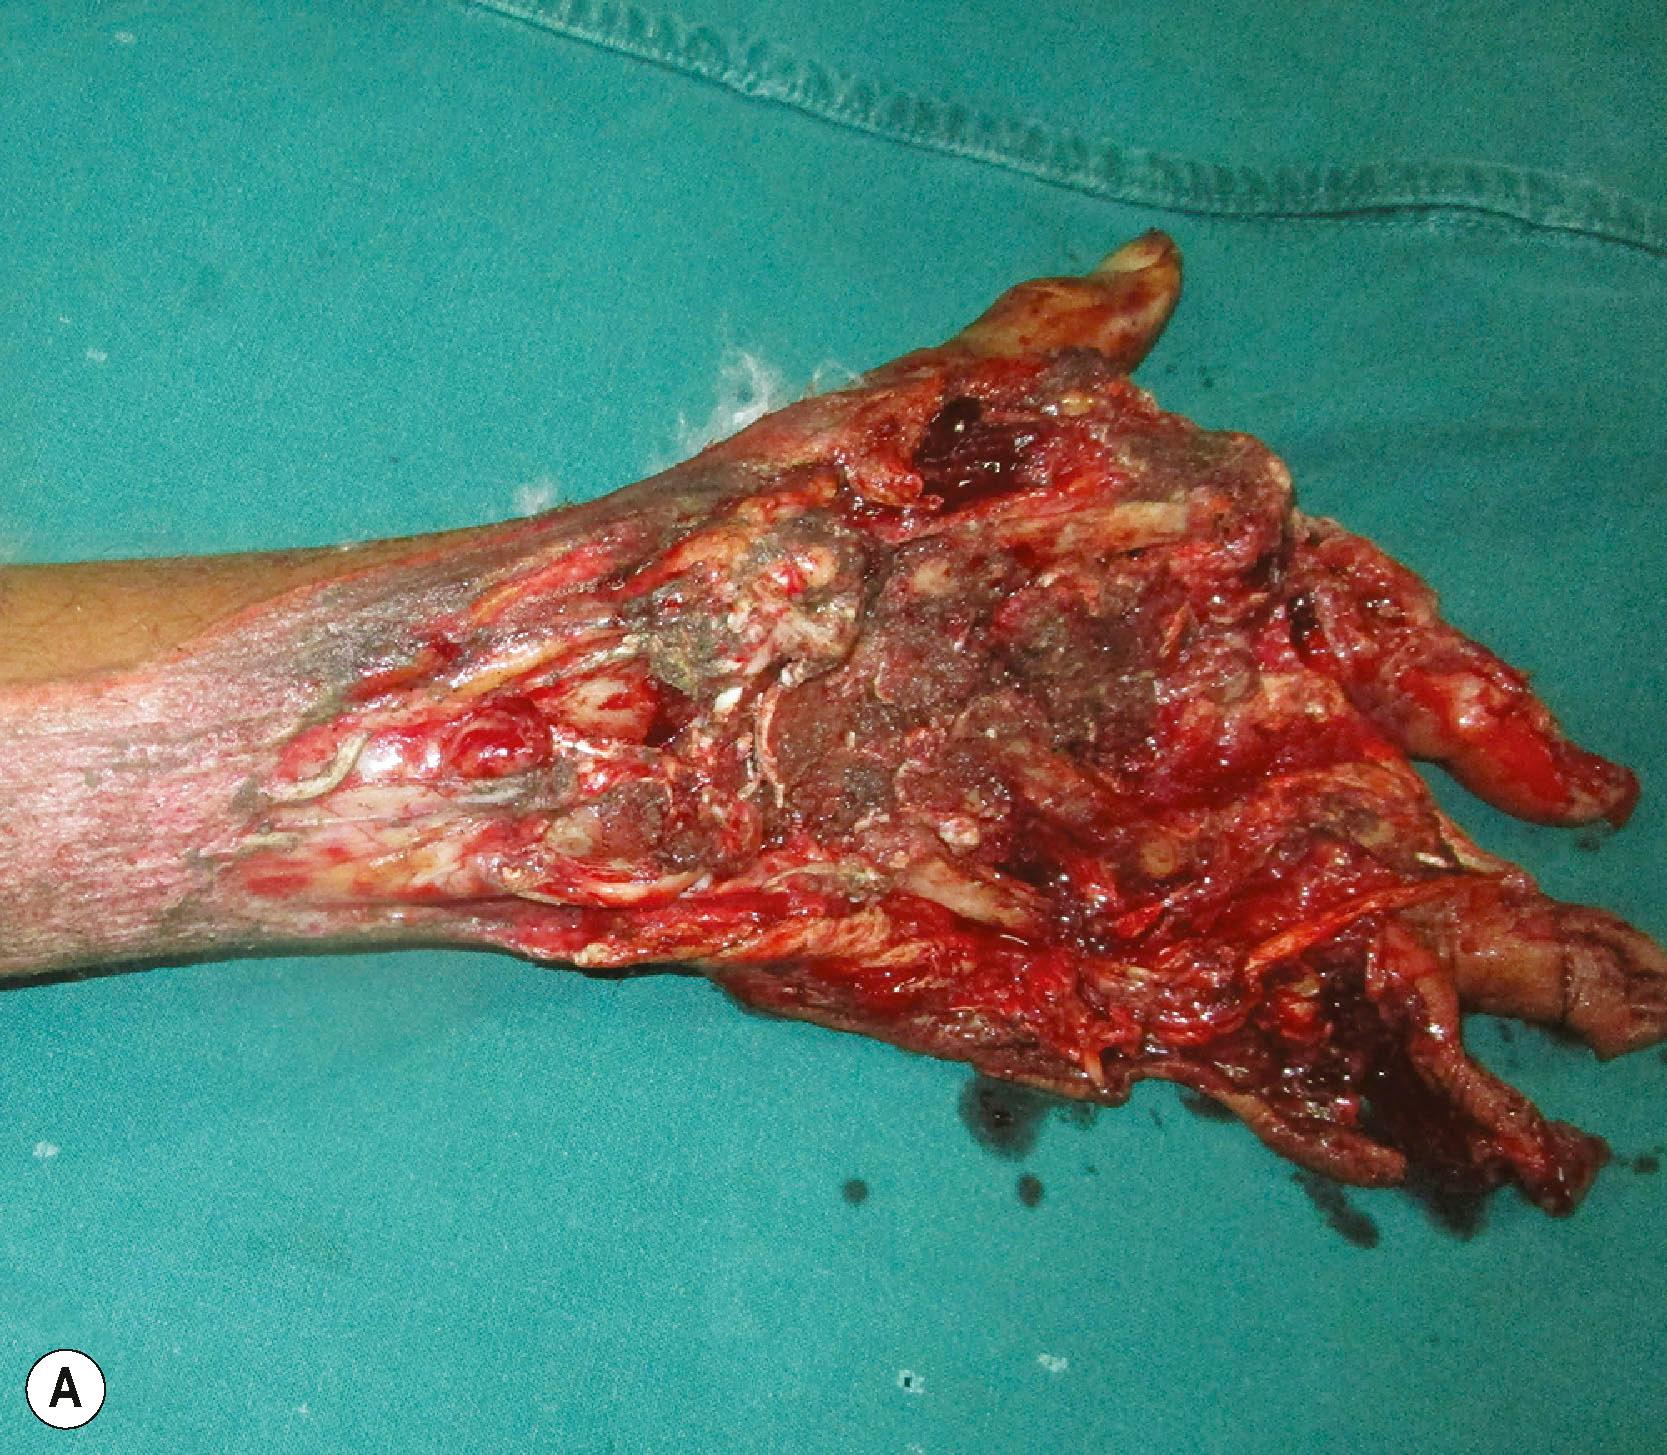 Figure 12.1, (A) Injury from a road traffic accident resulting in amputation of middle, ring and little fingers with composite tissue loss over the dorsum of the hand, wrist and distal forearm with massive contamination. (B) Post−debridement picture with stabilization of carpometacarpal joint and arthrodesis of the metacarpophalangeal and interphalangeal joints of the index. (C,D) Post groin flap cover, with a functional hand − a stable index, a mobile thumb with a good web space for pinch and grasp.